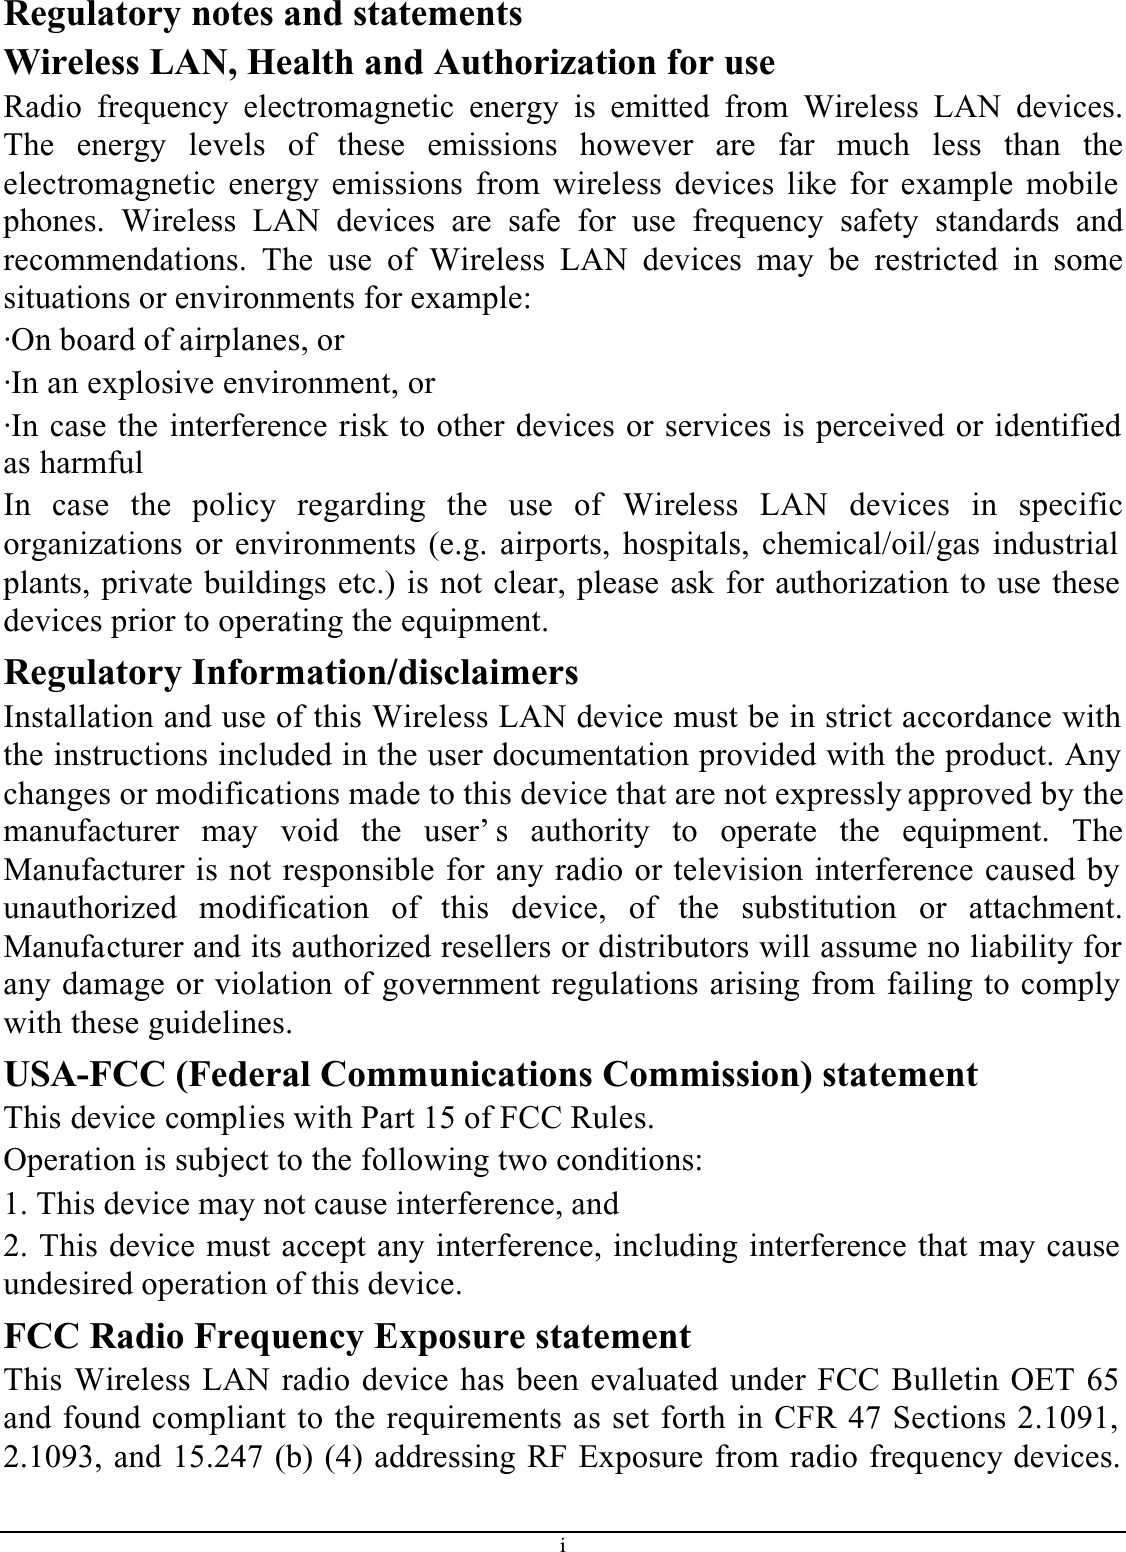 iRegulatory notes and statementsWireless LAN, Health and Authorization for useRadio frequency electromagnetic energy is emitted from Wireless LAN devices.The energy levels of these emissions however are far much less than theelectromagnetic energy emissions from wireless devices like for example mobile phones. Wireless LAN devices are safe for use frequency safety standards andrecommendations. The use of Wireless LAN devices may be restricted in somesituations or environments for example:·On board of airplanes, or·In an explosive environment, or·In case the interference risk to other devices or services is perceived or identified as harmfulIn case the policy regarding the use of Wireless LAN devices in specificorganizations or environments (e.g. airports, hospitals, chemical/oil/gas industrial plants, private buildings etc.) is not clear, please ask for authorization to use these devices prior to operating the equipment.Regulatory Information/disclaimersInstallation and use of this Wireless LAN device must be in strict accordance with the instructions included in the user documentation provided with the product. Any changes or modifications made to this device that are not expressly approved by the manufacturer may void the user’ s authority to operate the equipment. TheManufacturer is not responsible for any radio or television interference caused by unauthorized modification of this device, of the substitution or attachment.Manufacturer and its authorized resellers or distributors will assume no liability for any damage or violation of government regulations arising from failing to comply with these guidelines.USA-FCC (Federal Communications Commission) statementThis device complies with Part 15 of FCC Rules.Operation is subject to the following two conditions:1. This device may not cause interference, and2. This device must accept any interference, including interference that may cause undesired operation of this device.FCC Radio Frequency Exposure statementThis Wireless LAN radio device has been evaluated under FCC Bulletin OET 65 and found compliant to the requirements as set forth in CFR 47 Sections 2.1091, 2.1093, and 15.247 (b) (4) addressing RF Exposure from radio frequency devices. 